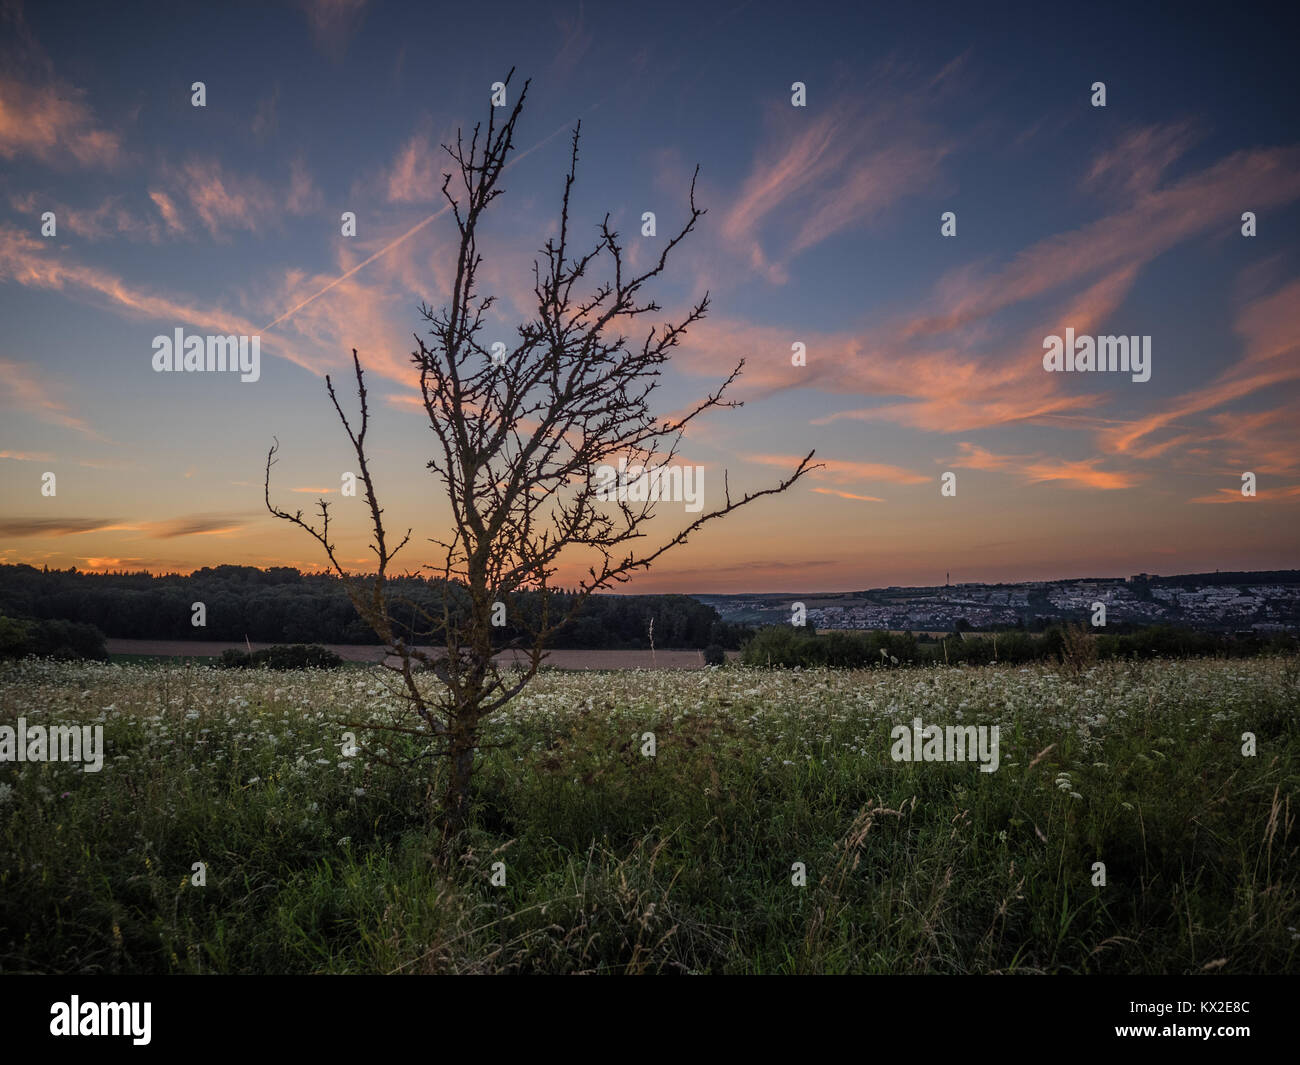 dead tree in front of evening sky, ulm, germany Stock Photo